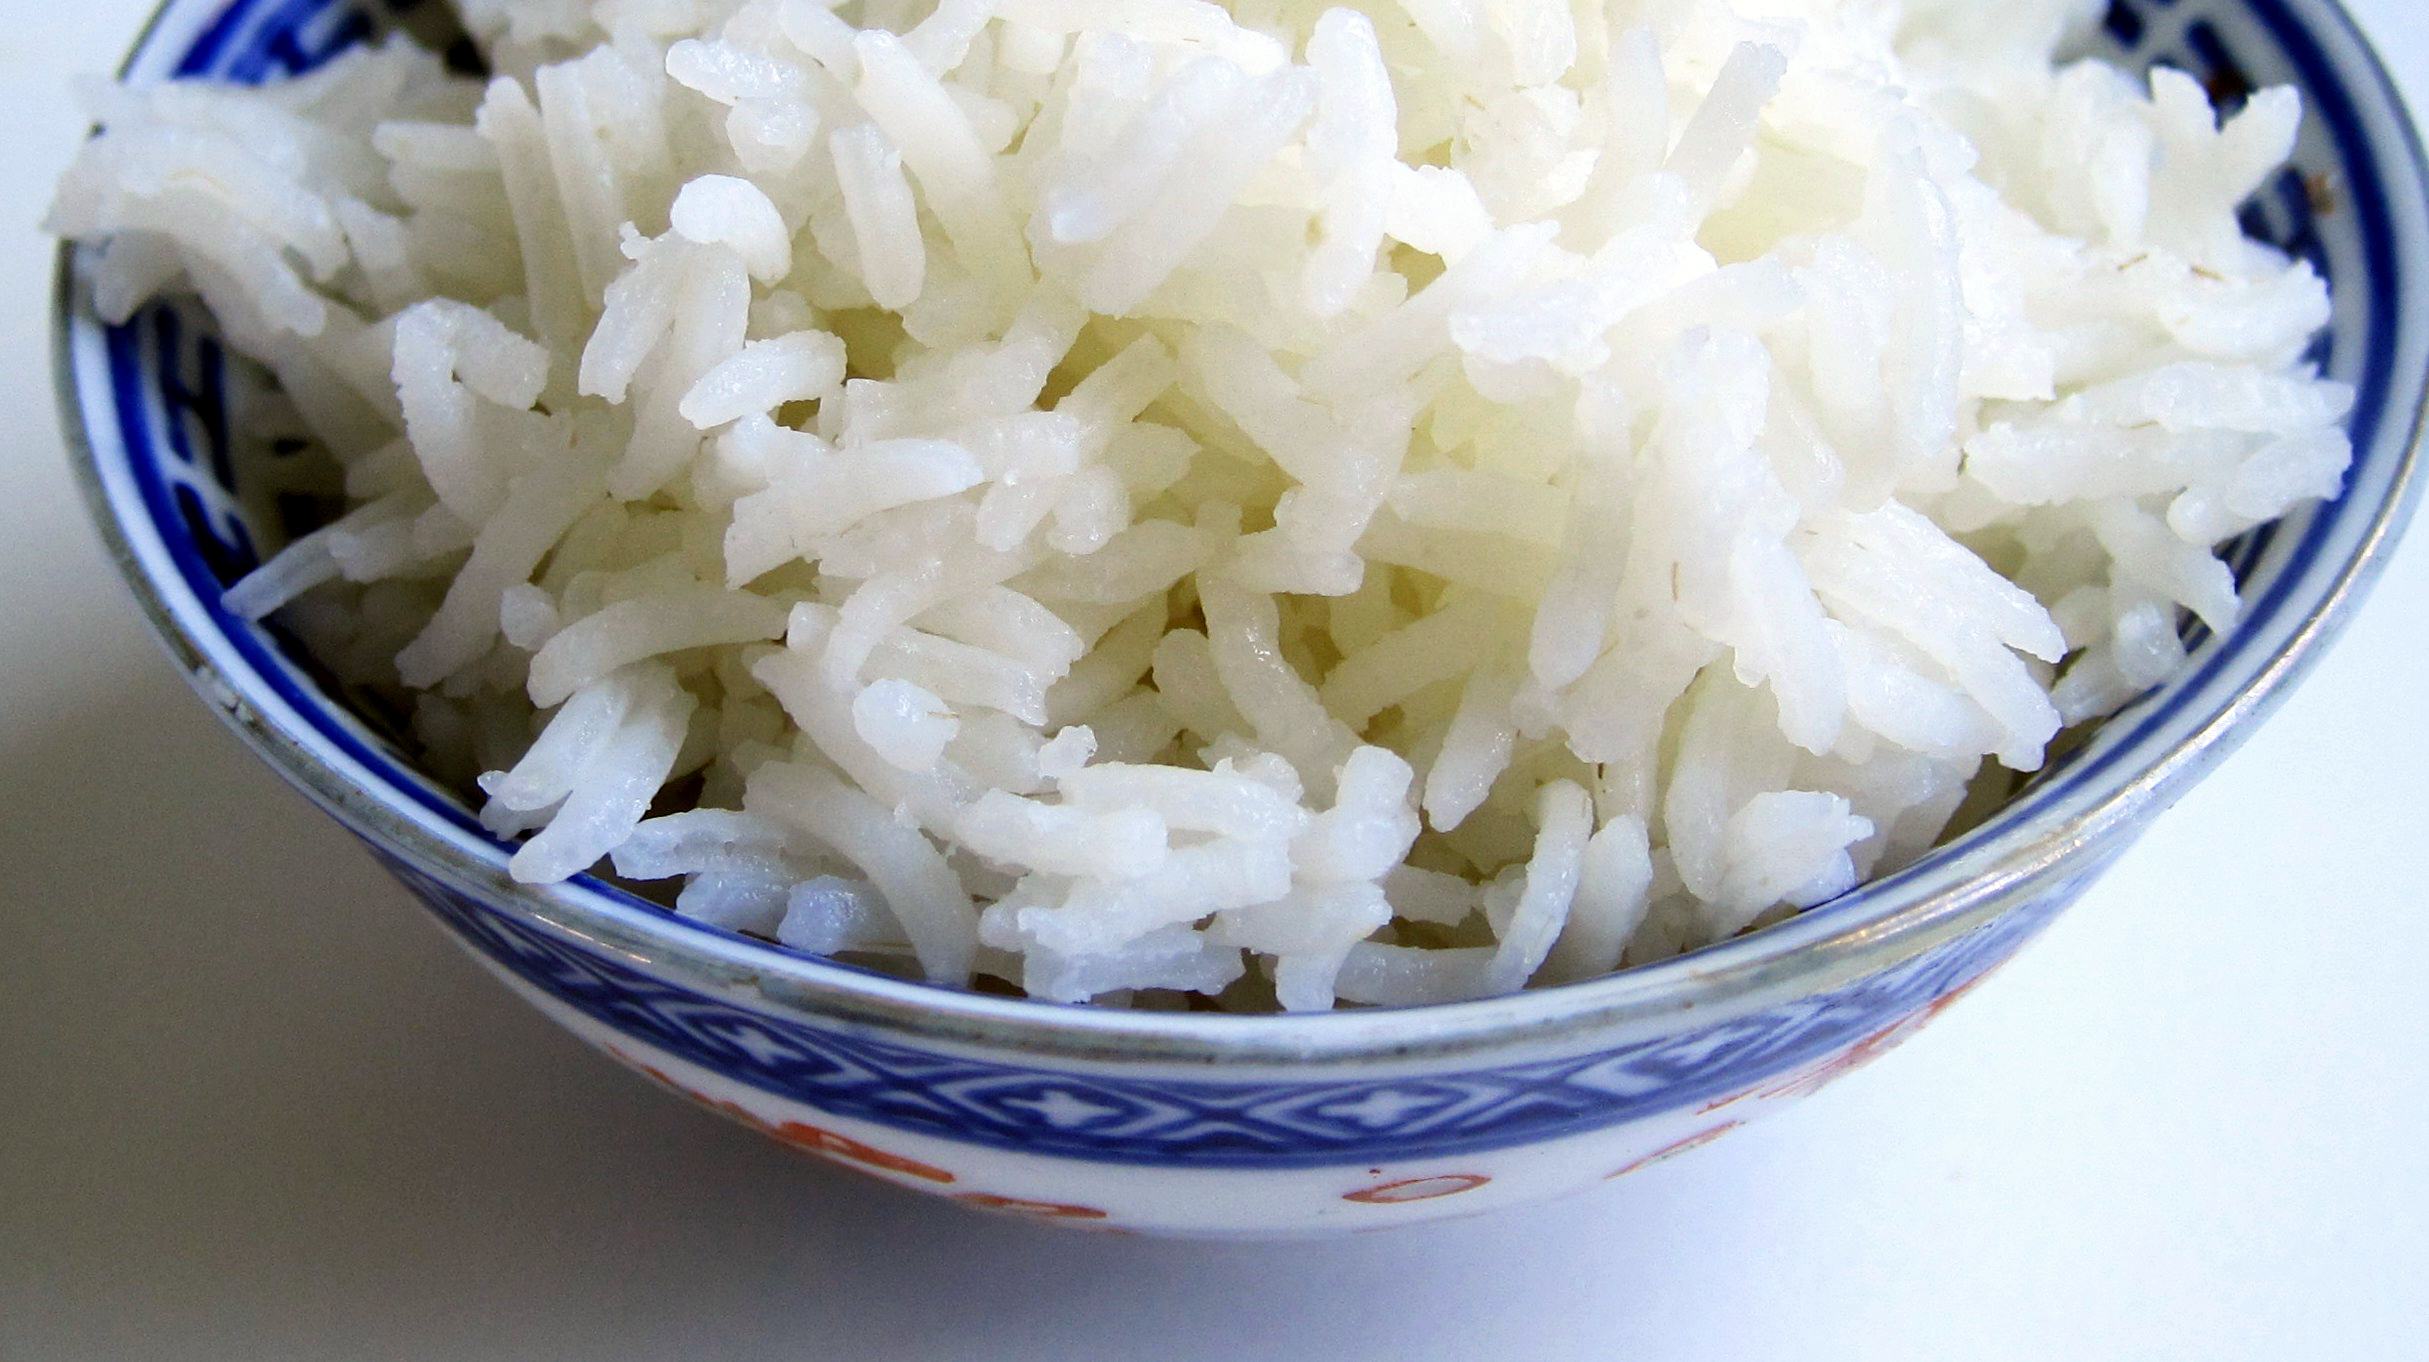 PERFECT Pressure Cooker Rice - two easy ways! ⋆ hip pressure cooking